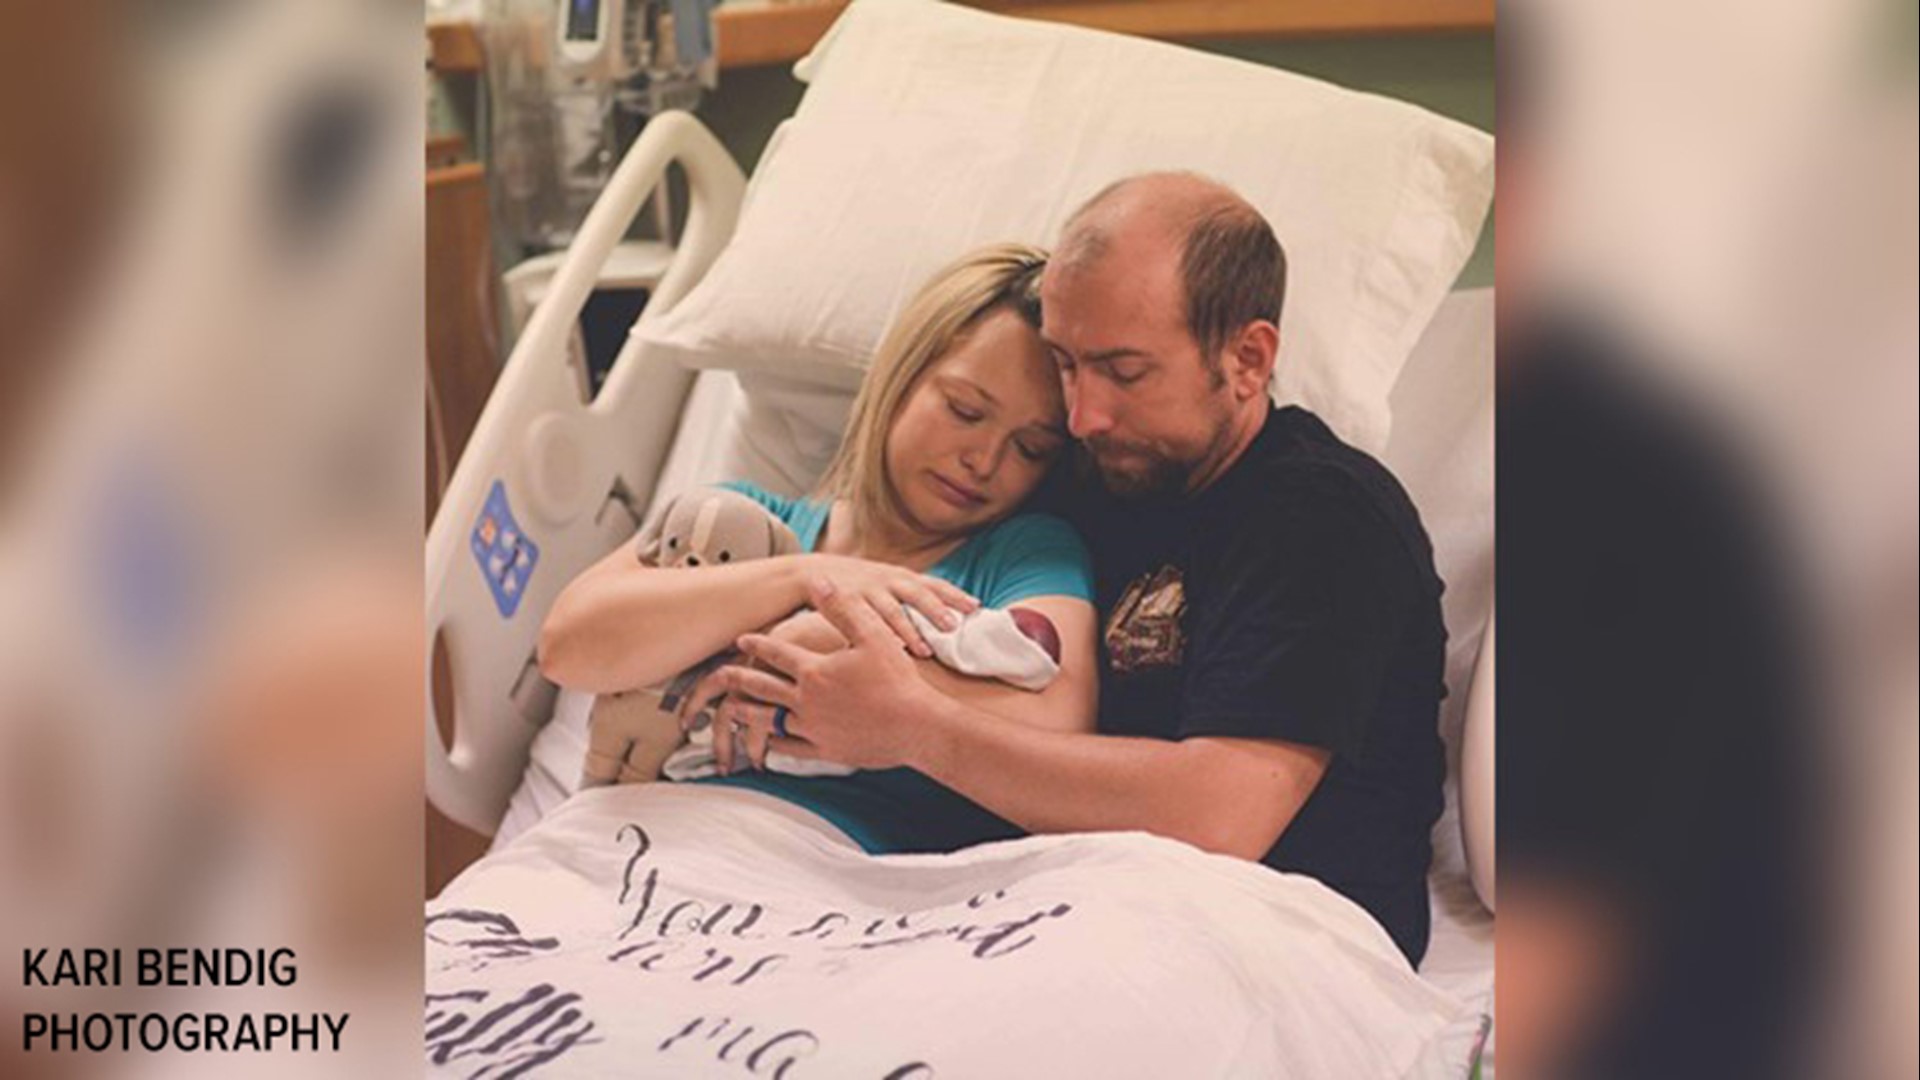 Britni and Zach Sauls lost their baby in October 2018. A year later, they've been giving out "Ollie's Box" to help couples experiencing stillbirths.